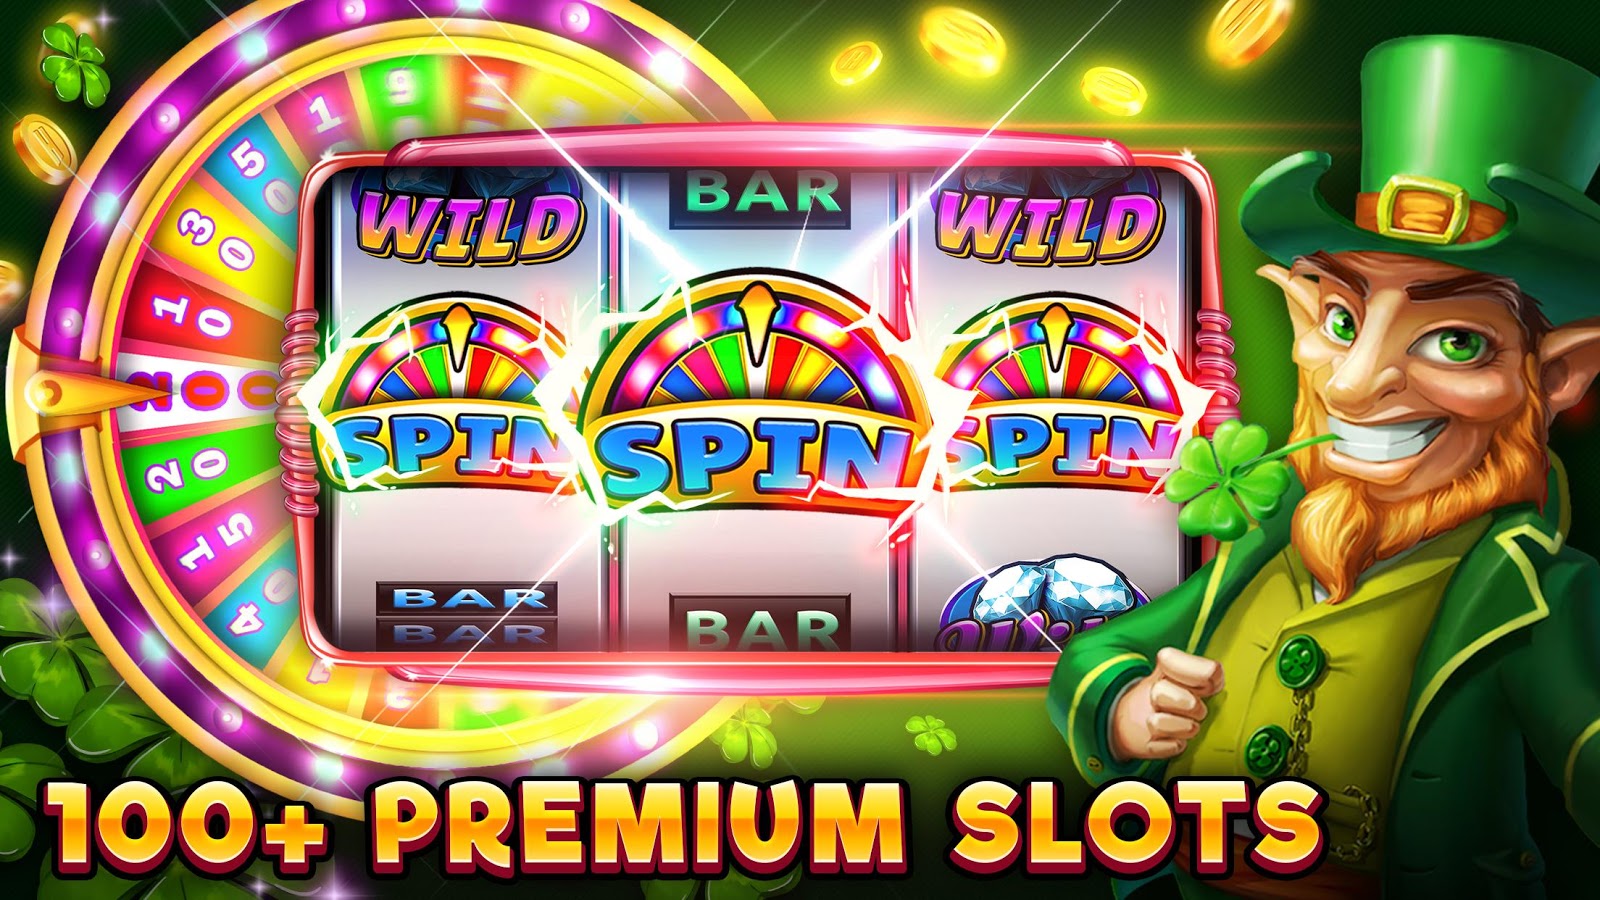 5 Emerging how to win at slots Trends To Watch In 2021